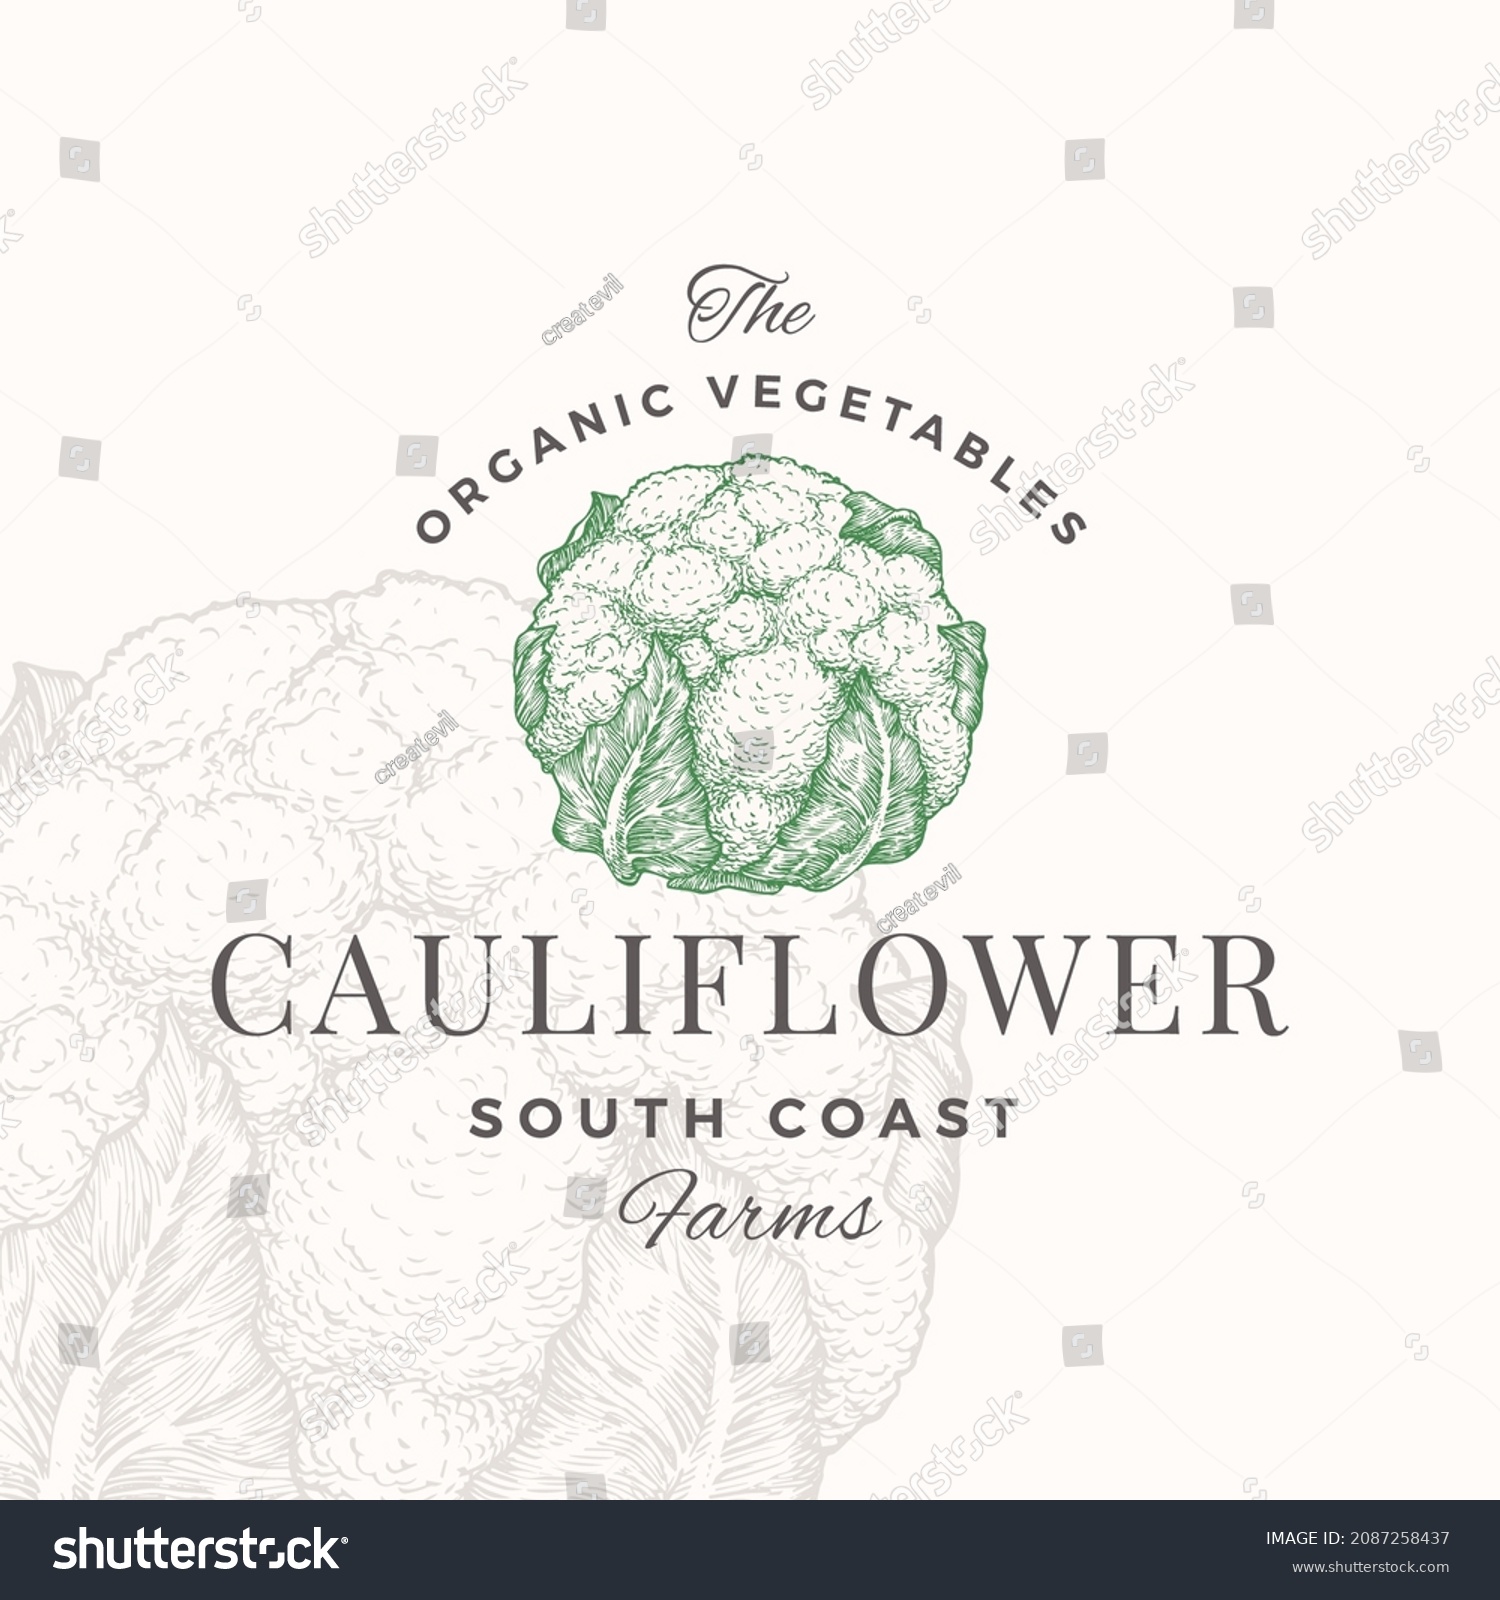 Cauliflower Badge or Logo Template. Hand Drawn Vegetable Sketch with Retro Typography. Premium Plant Based Vegan Food Emblem. Isolated #2087258437